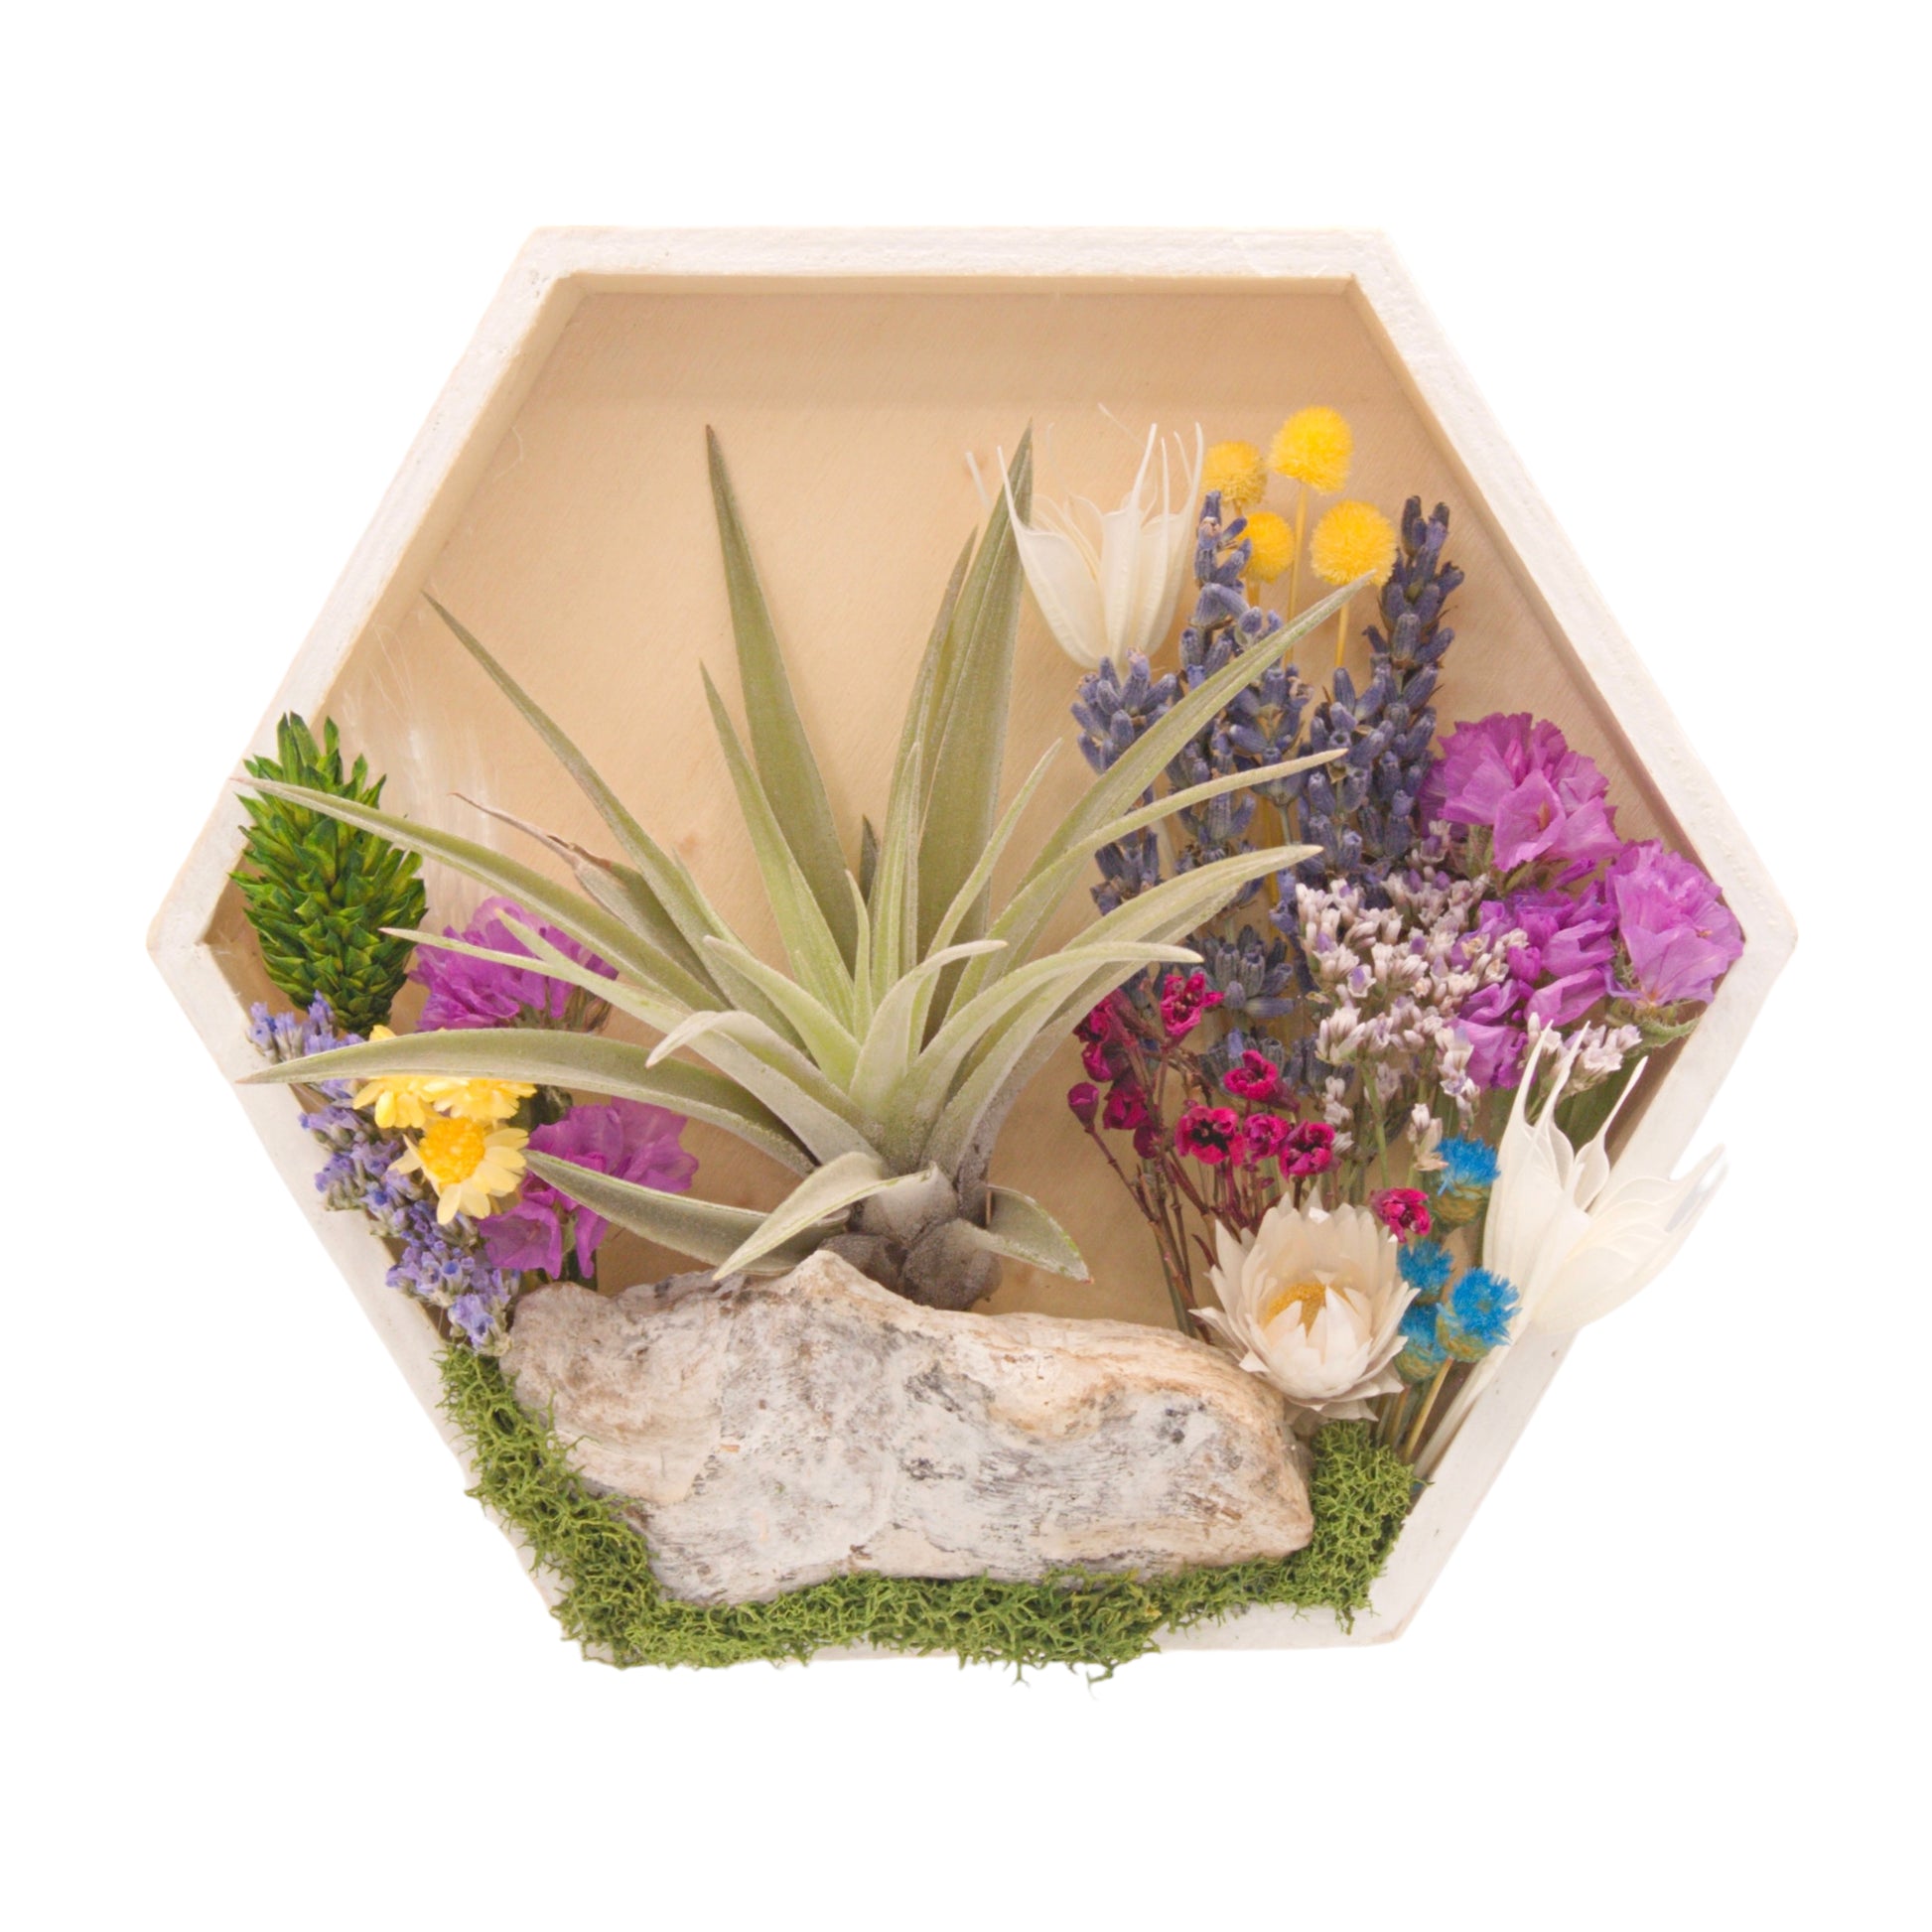 Hexagon wooden box frame, outside edges painted white, filled with colourful dried flowers, wood, moss and an airplant